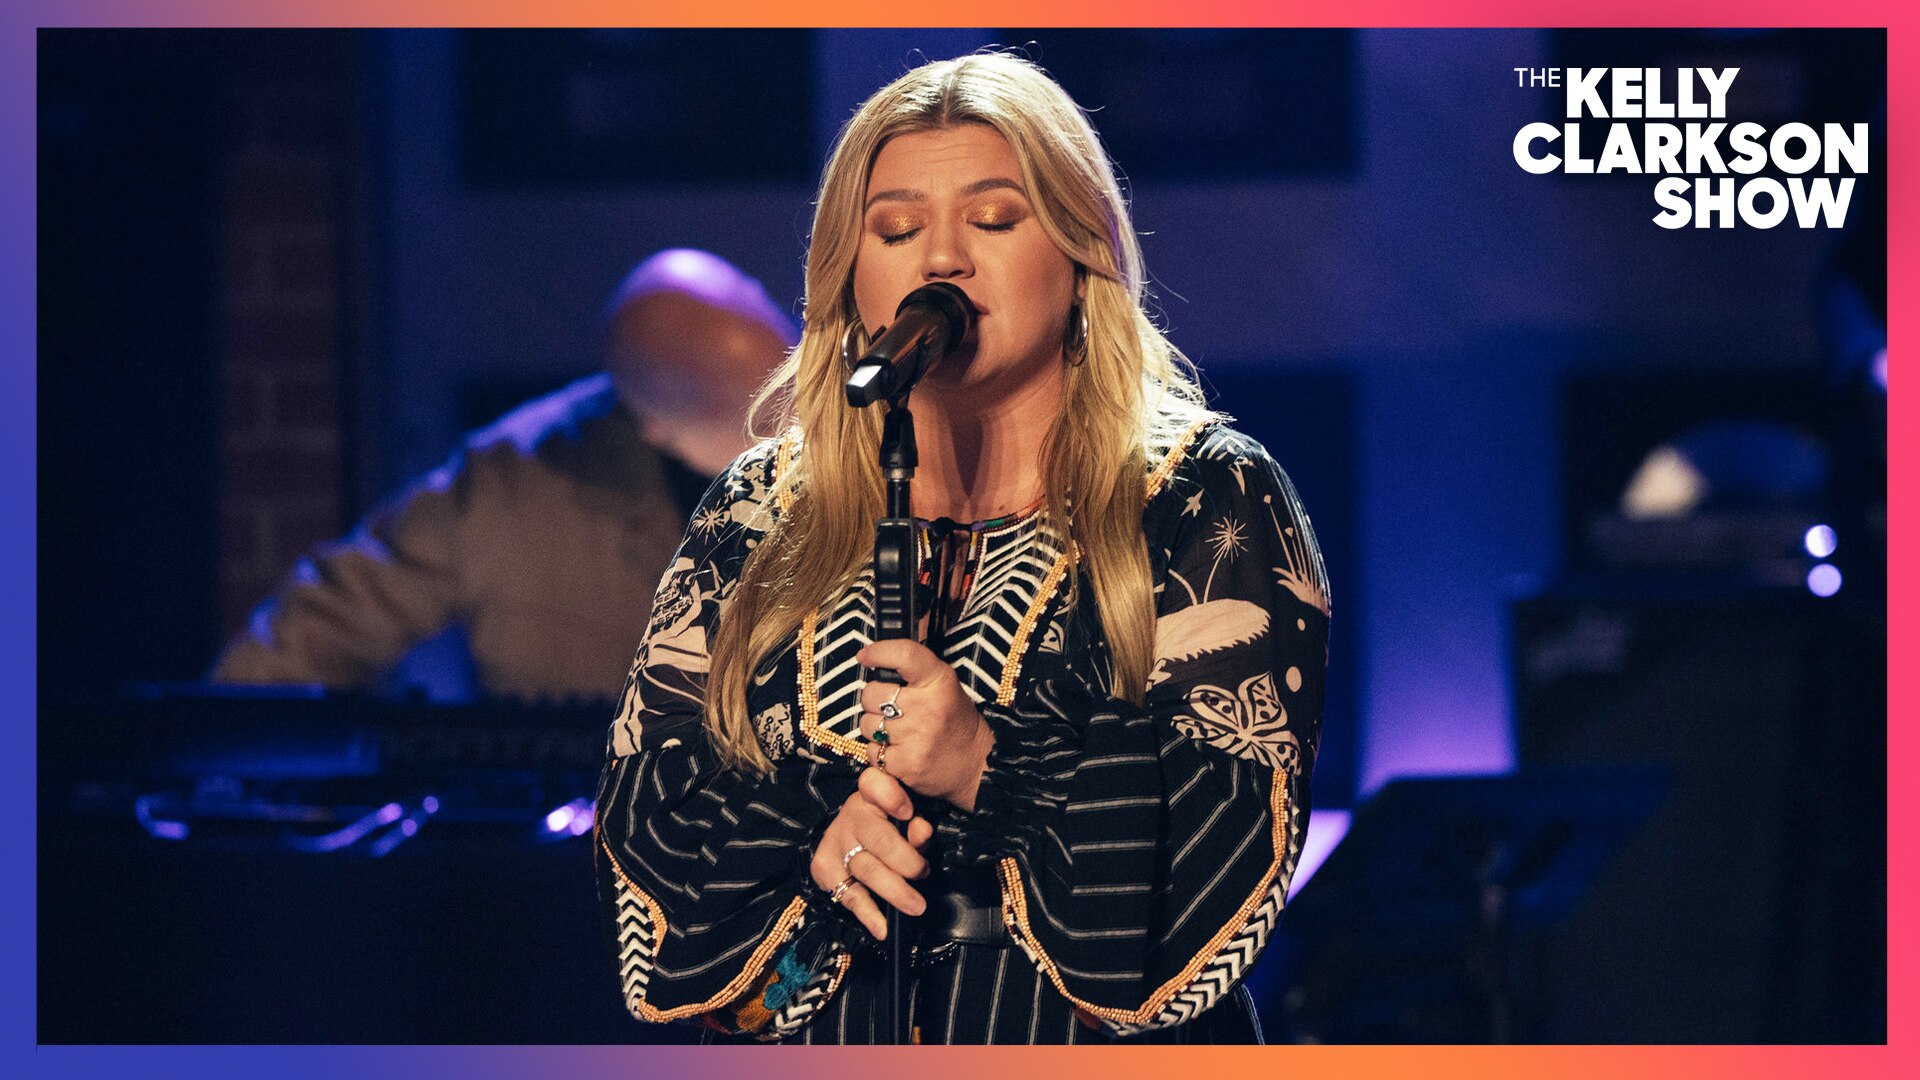 Watch The Kelly Clarkson Show Official Website Highlight Kelly Clarkson Covers Stayaway By